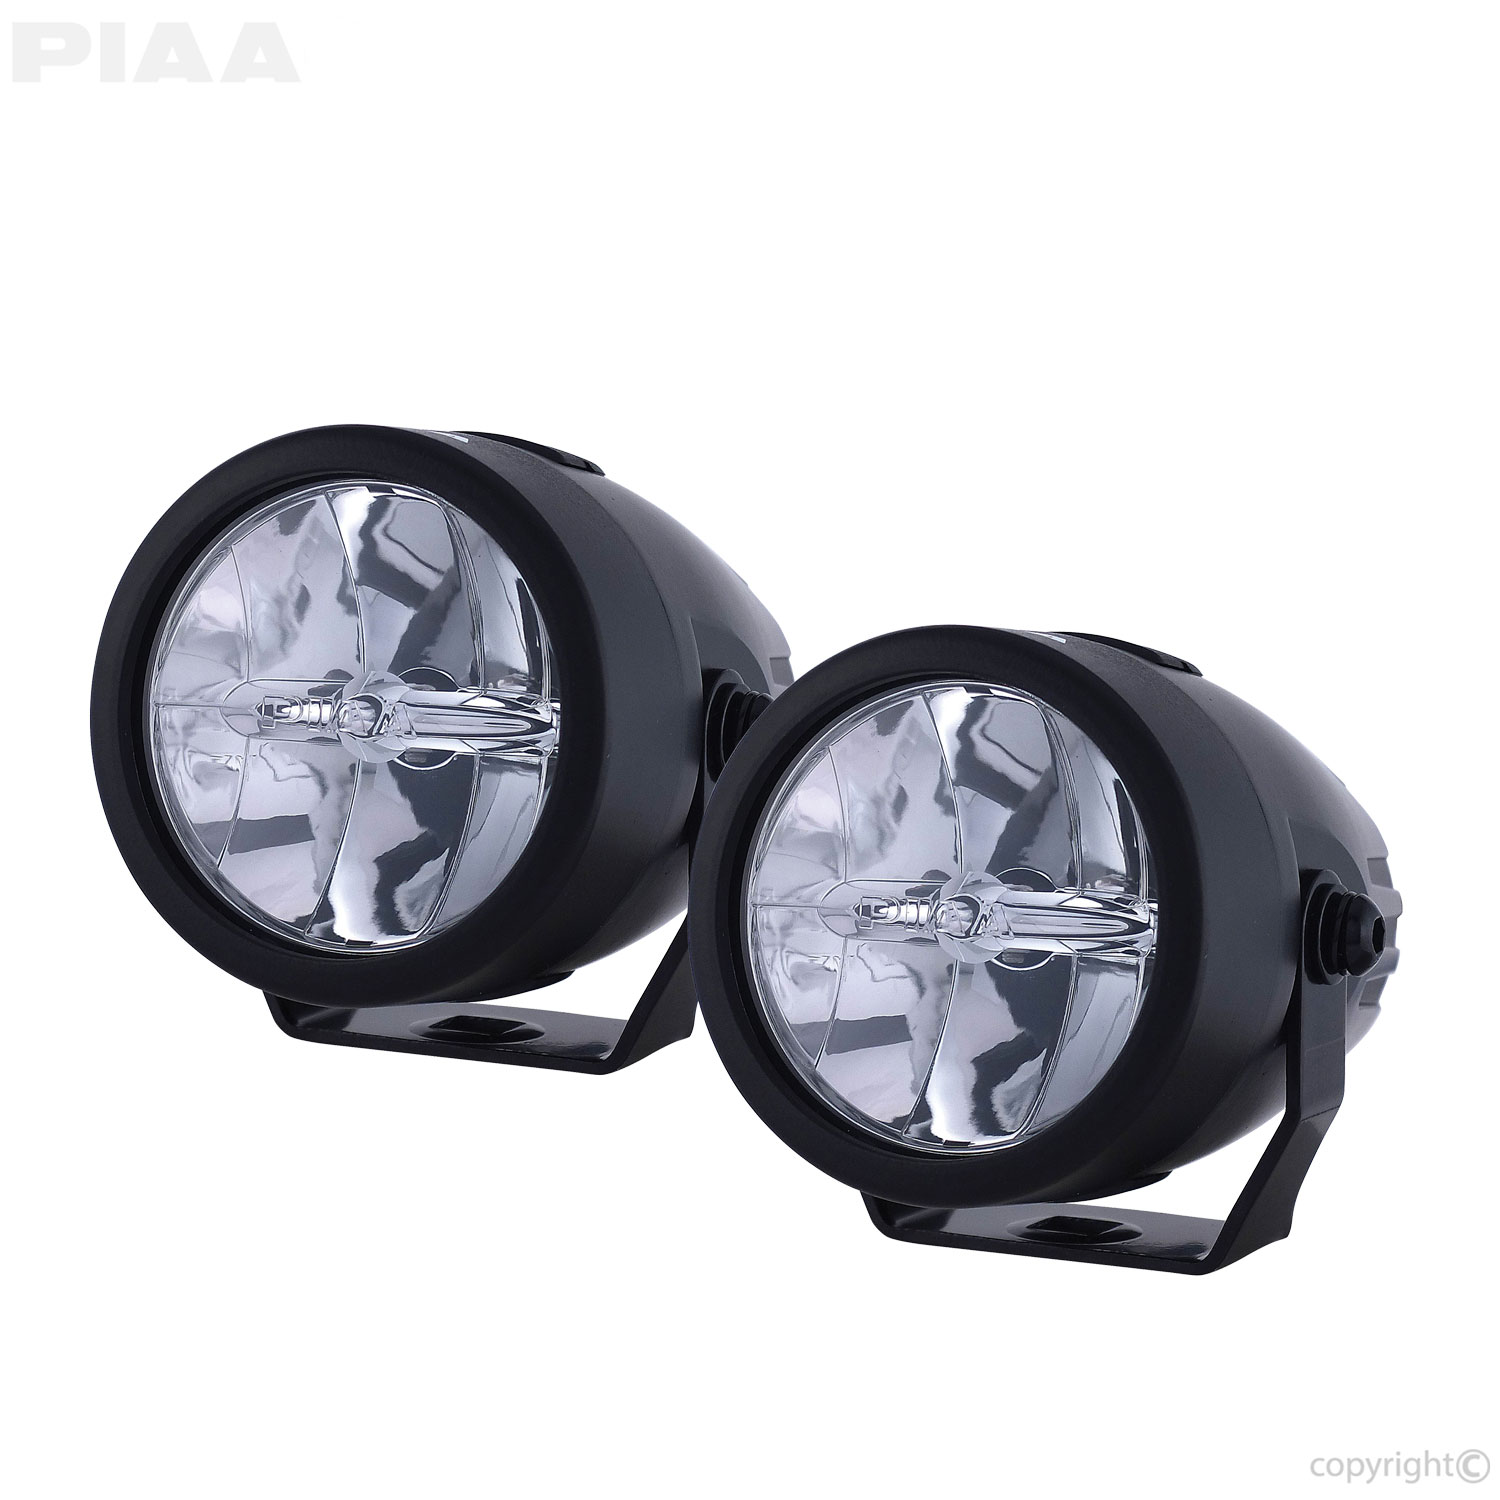 https://www.piaa.com/resize/Shared/product-images/ps-lamps/piaa-73272-lp270-led-dual-hr.jpg?bw=1000&w=1000&bh=1000&h=1000